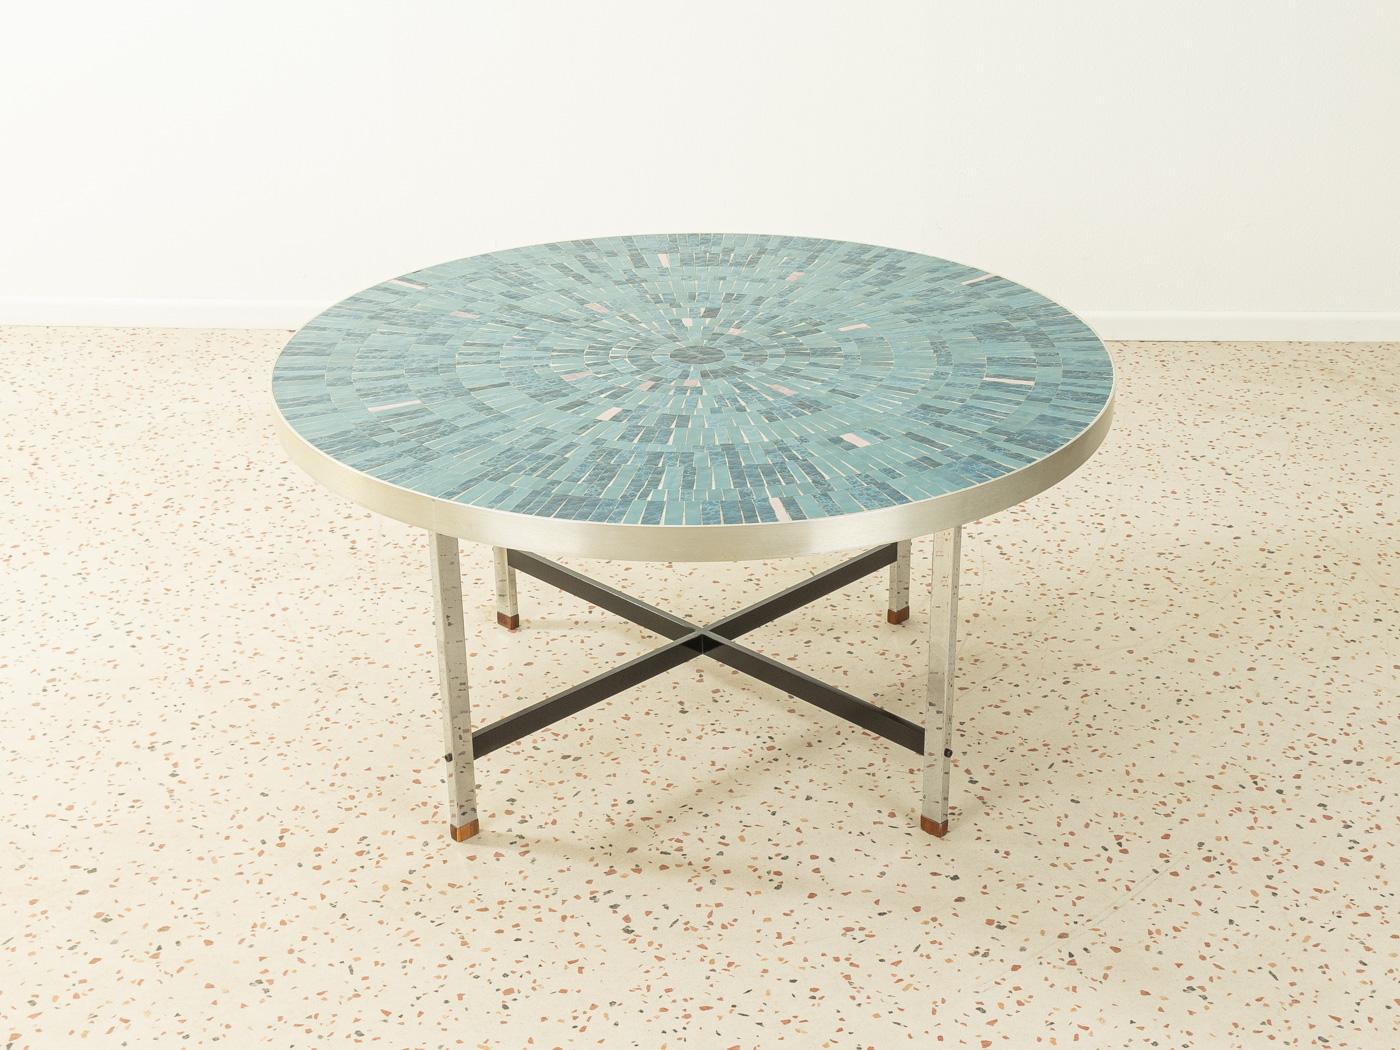 Mid-Century Modern Berthold Müller-oerlinghausen Mosaic Coffee Table, Turquoise and Grey, 1960s